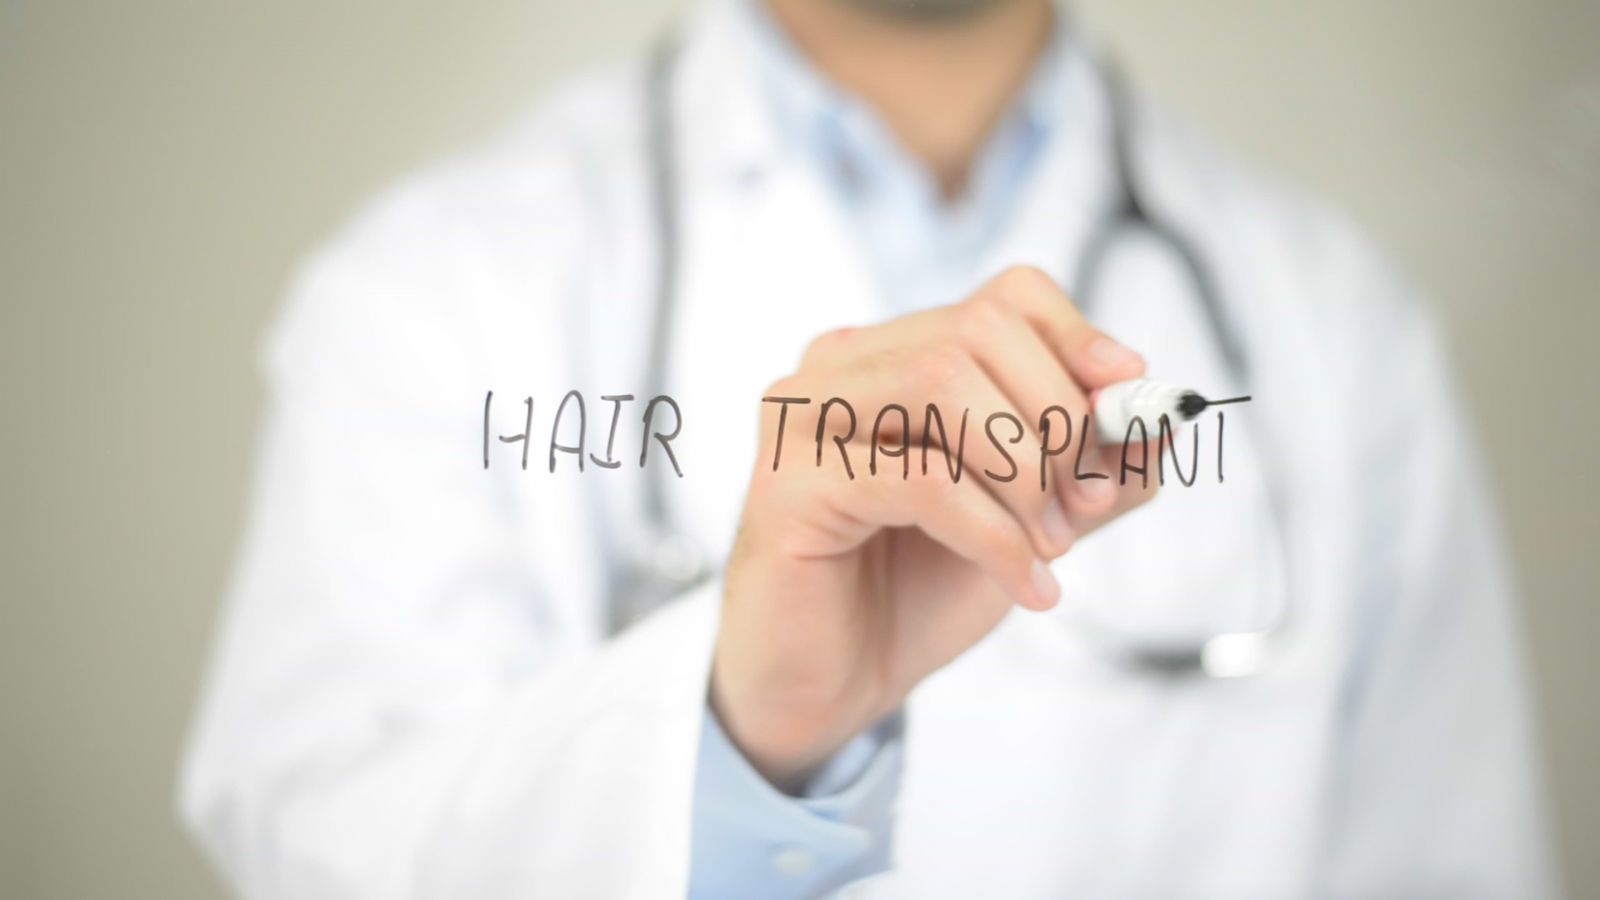 BEST HAIR TRANSPLANT TOURISM IN TURKEY 2020: WHAT IS A HAIR TRANSPLANT? HOW MUCH DOES IT COST?